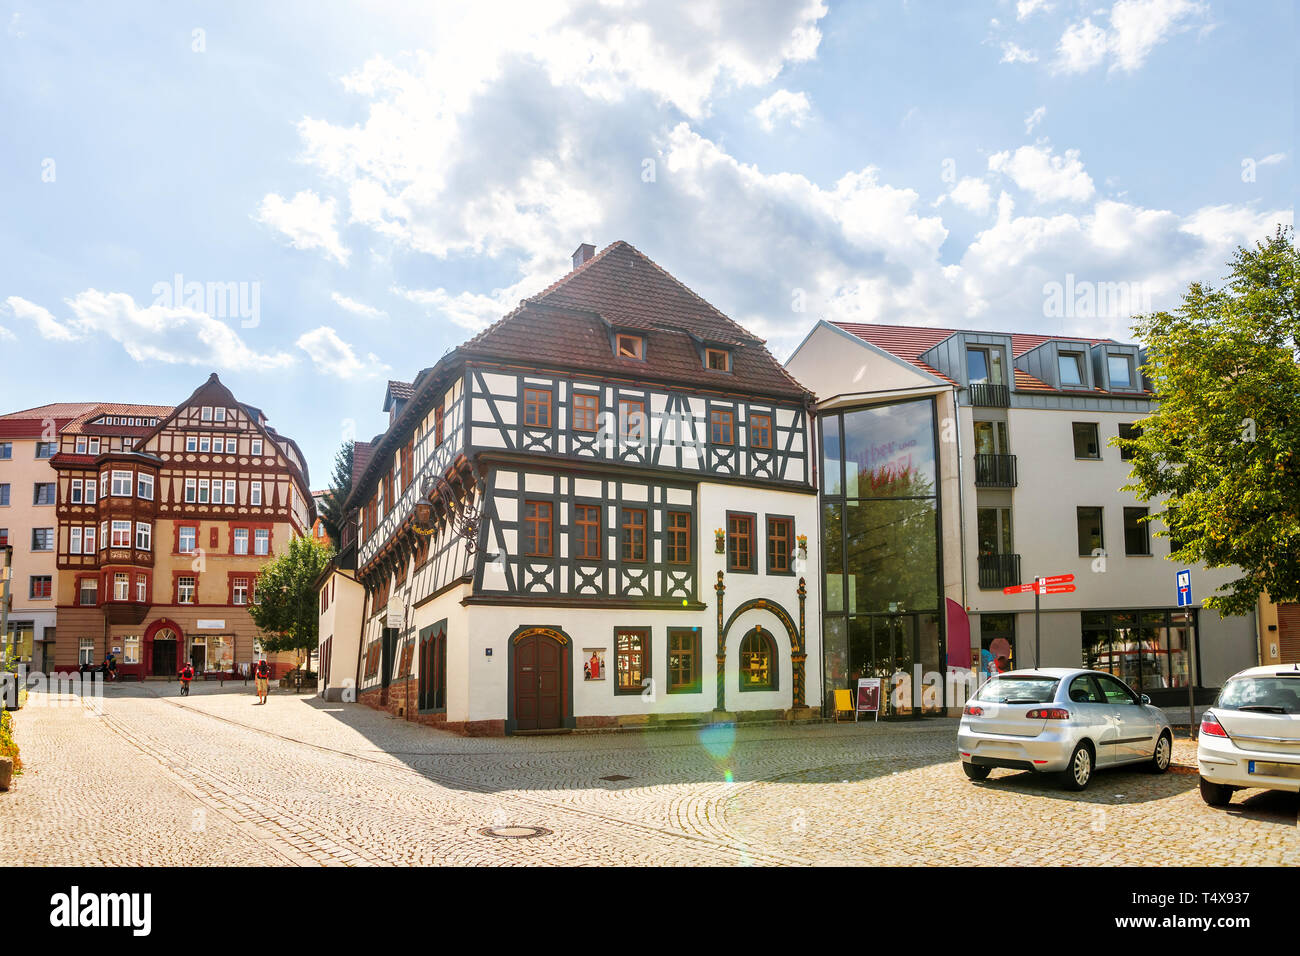 Lutherhaus in Eisenach, Germany Stock Photo